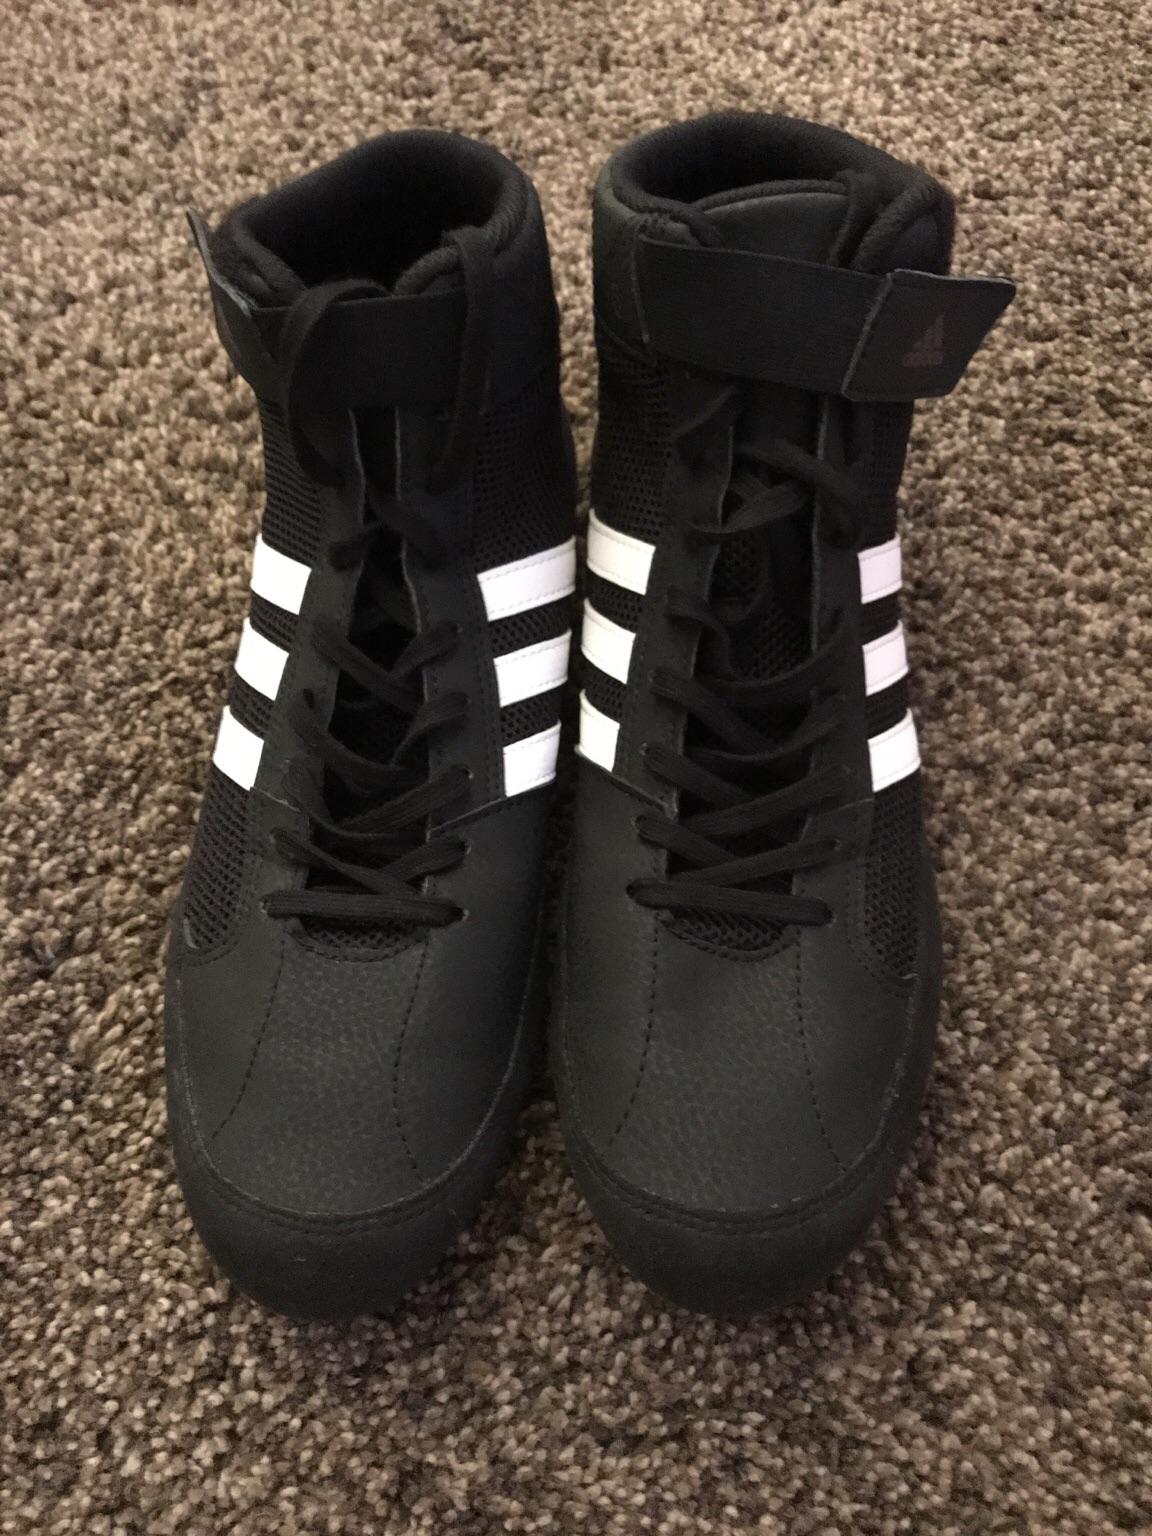 MENS ADIDAS HAVOC BOXING BOOTS in 